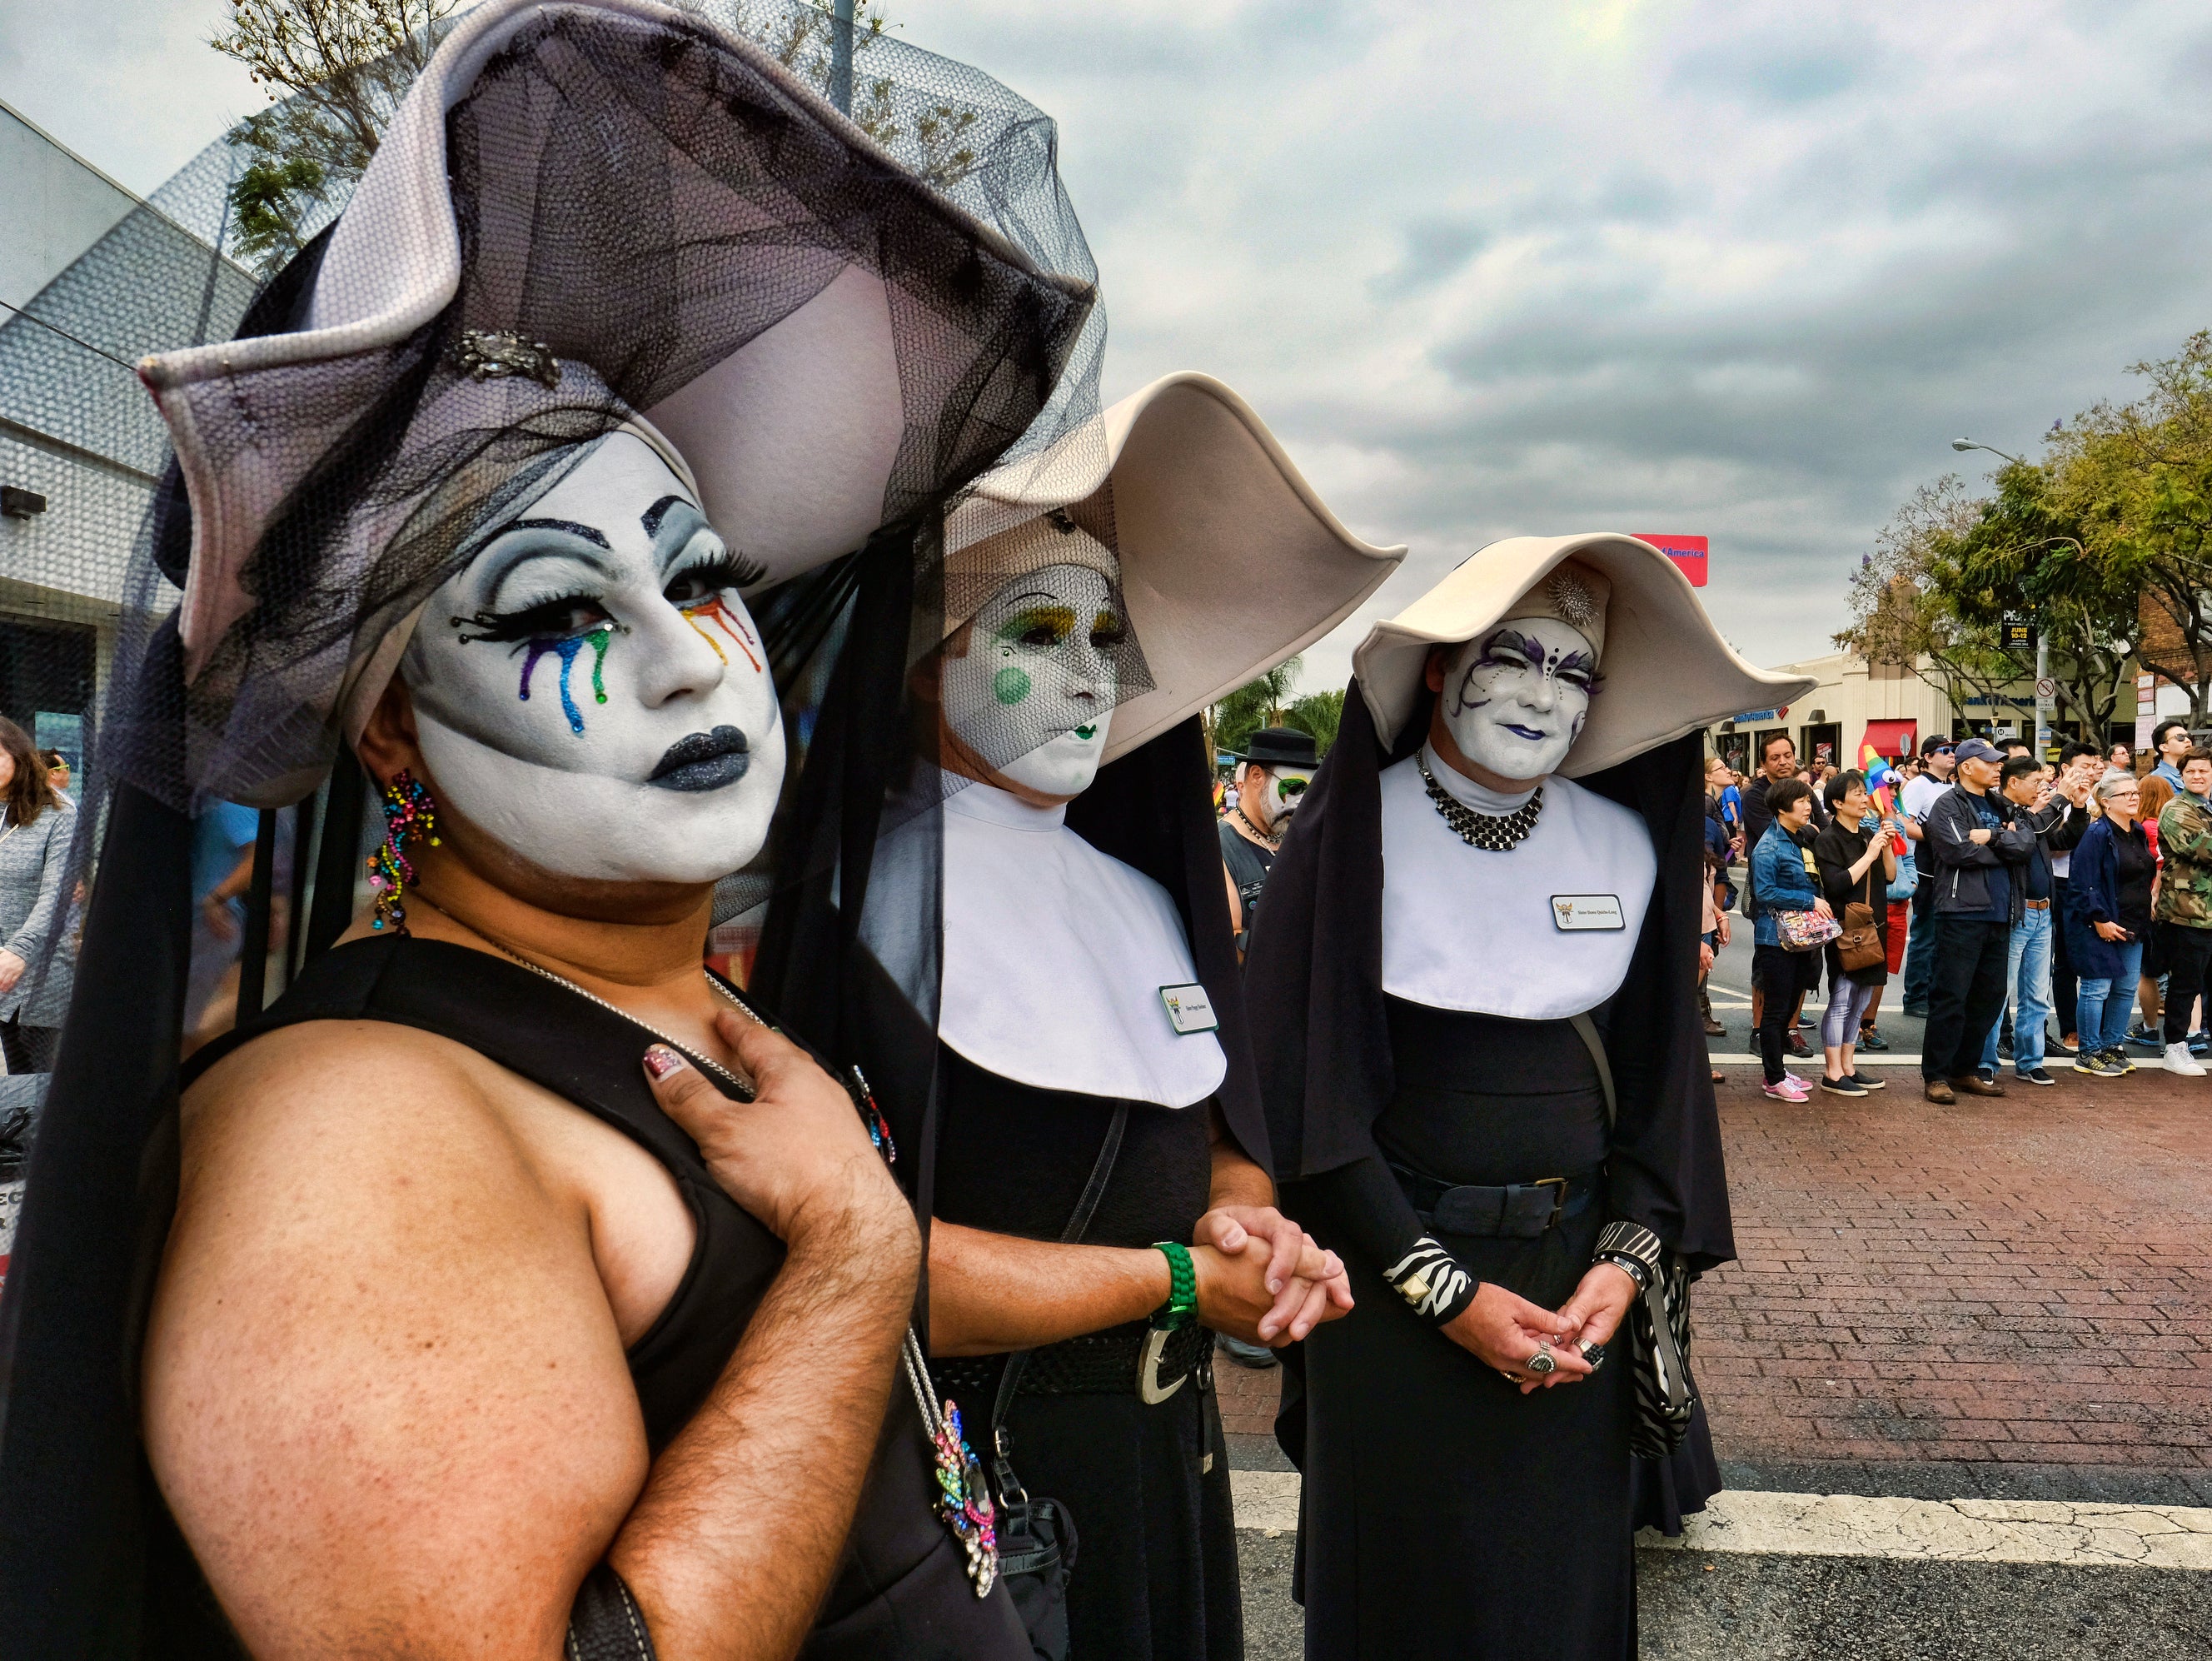 The LA chapter of the Sisters of Perpetual Indulgence attends a Pride parade in Hollywood on 12 Jun 2016